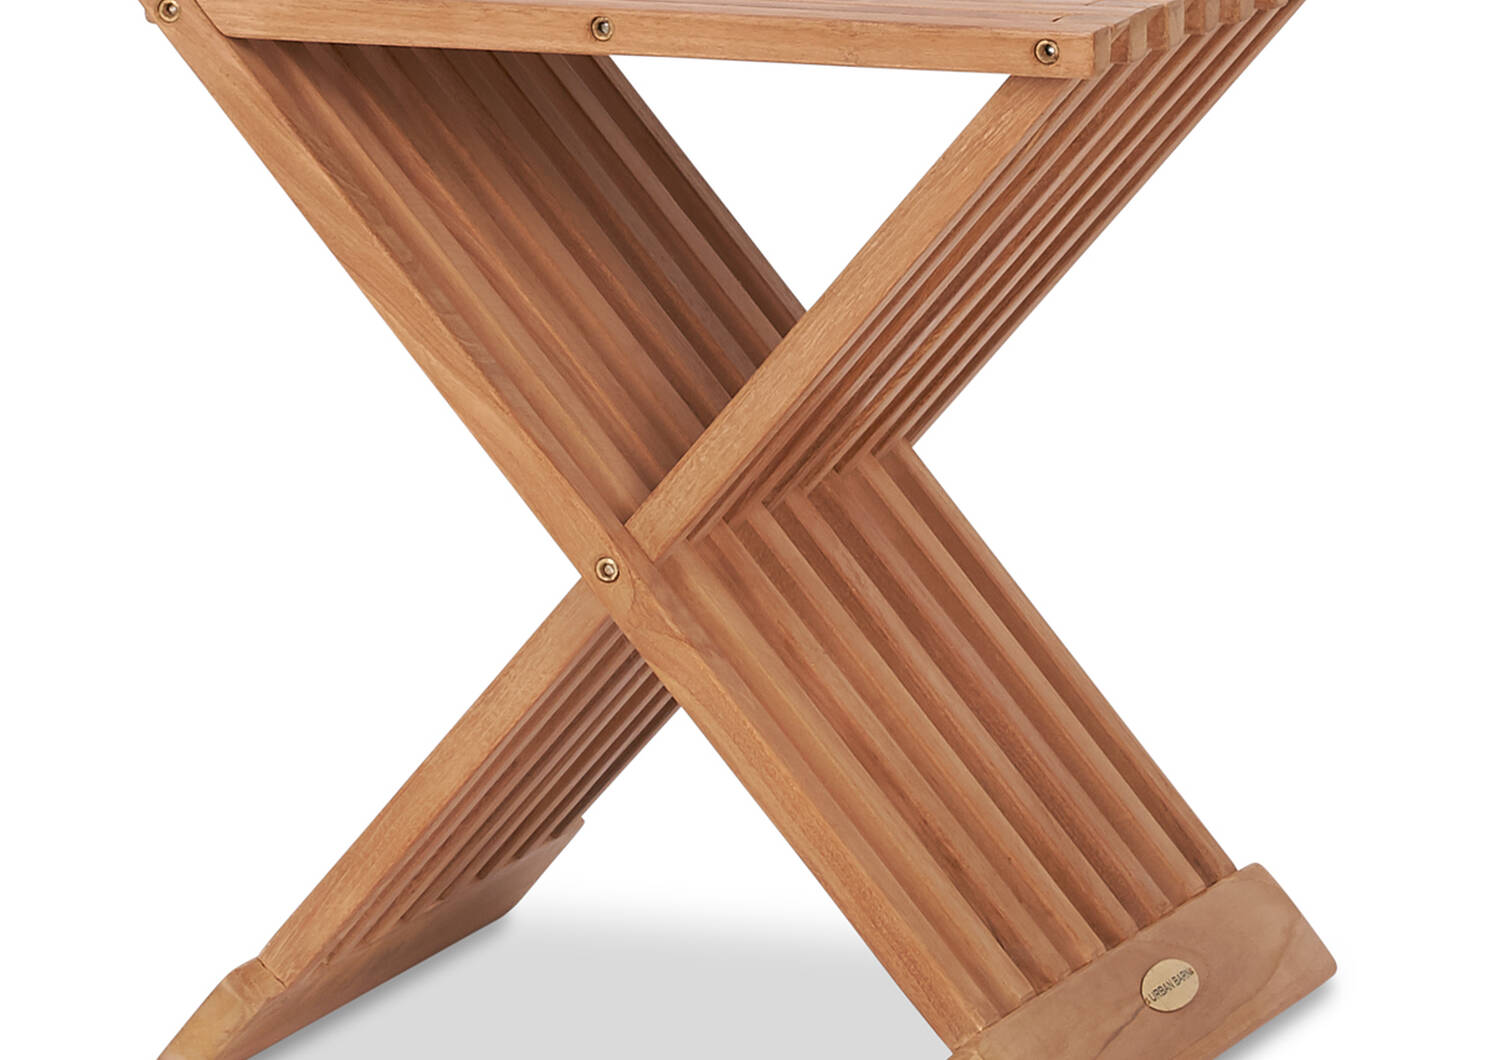 Table d'appoint Galiano -teck naturel